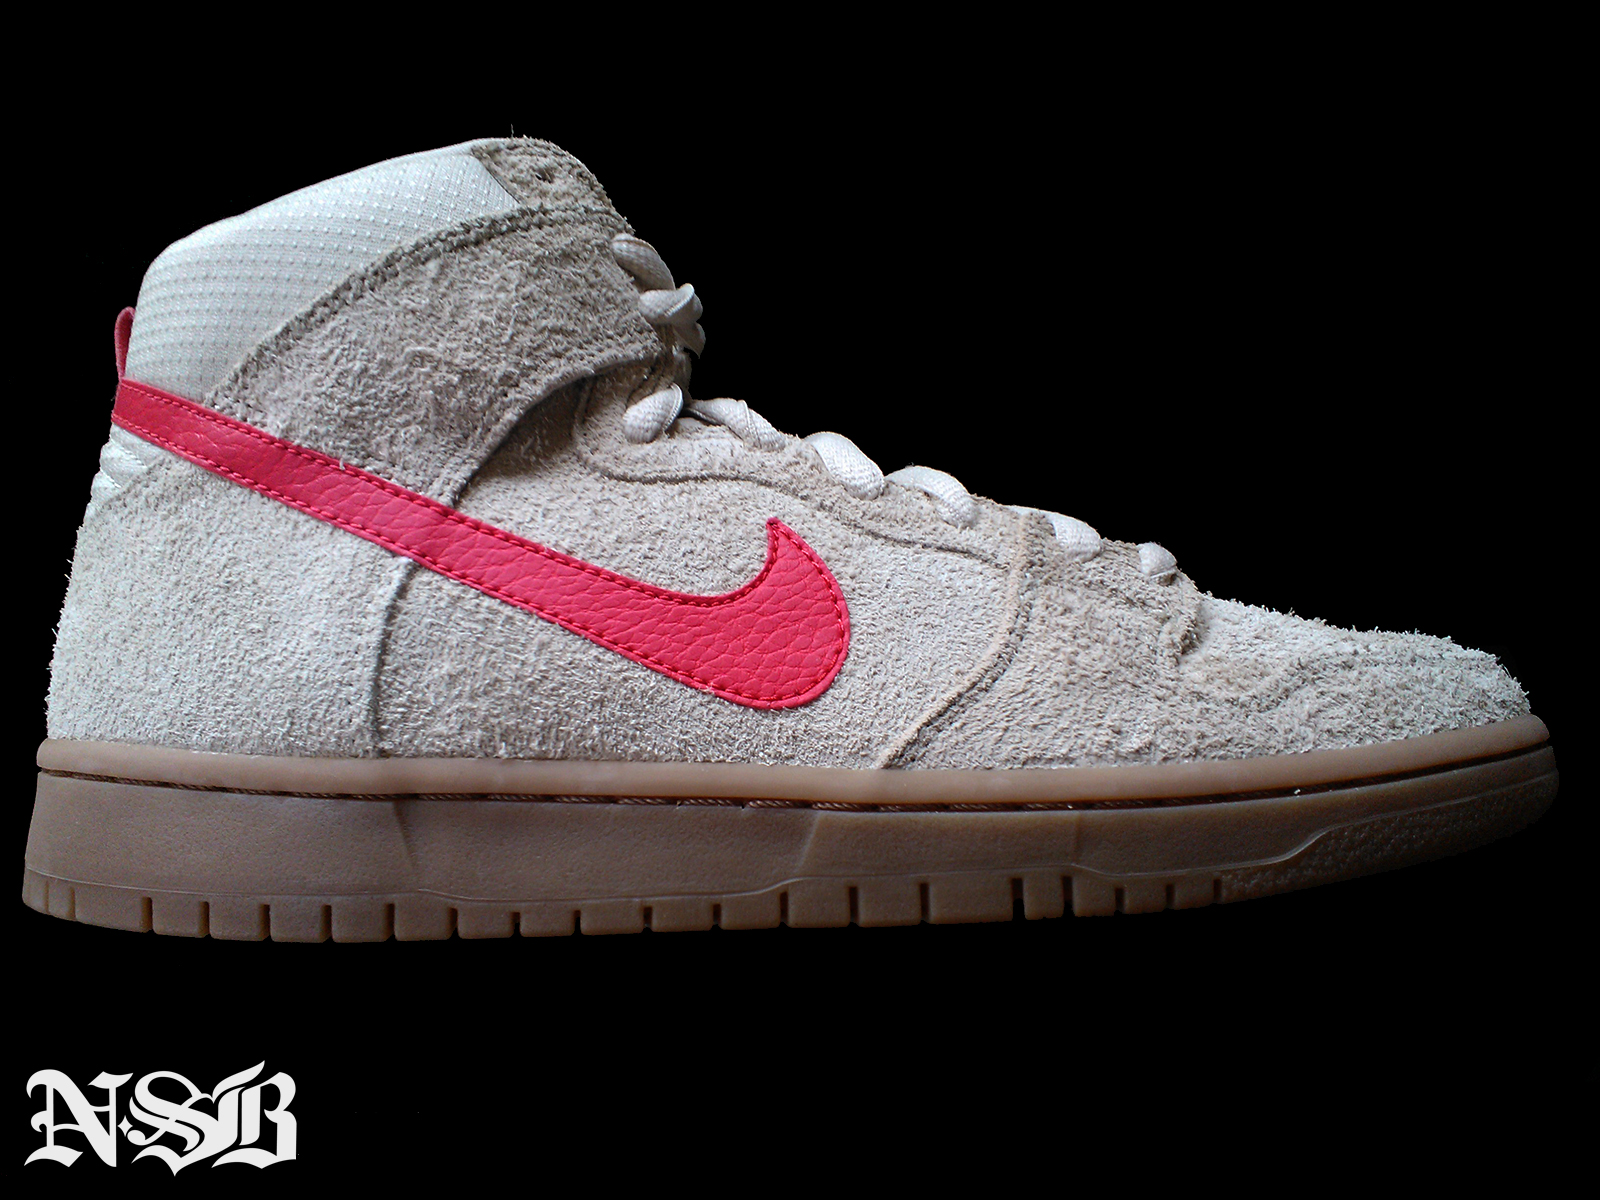 Nike SB Dunk High ‘Vanilla Suede’ – Another Look